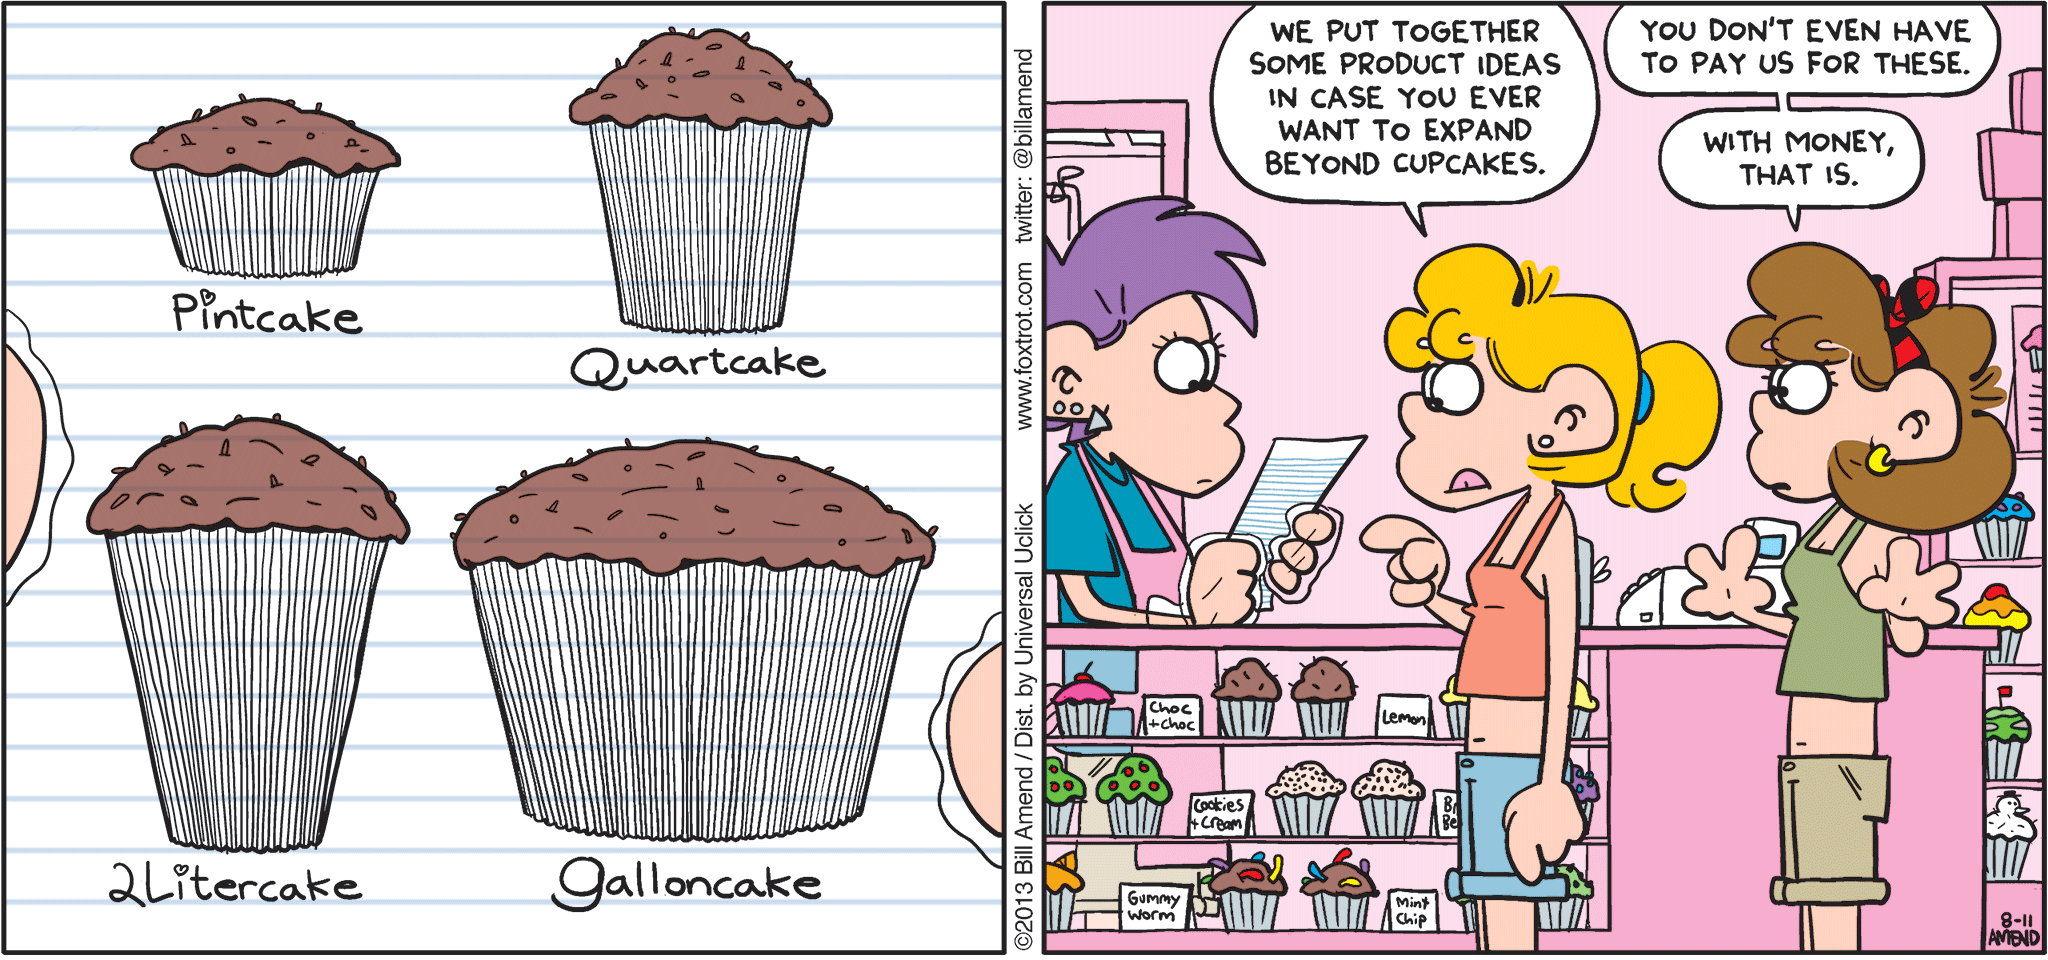 FoxTrot by Bill Amend - "Thinking Big" published August 11, 2013 - Paige: We put together some product ideas in case you ever want to expand beyond cupcakes. Girl: You don't even have to pay us for these. With money, that is.